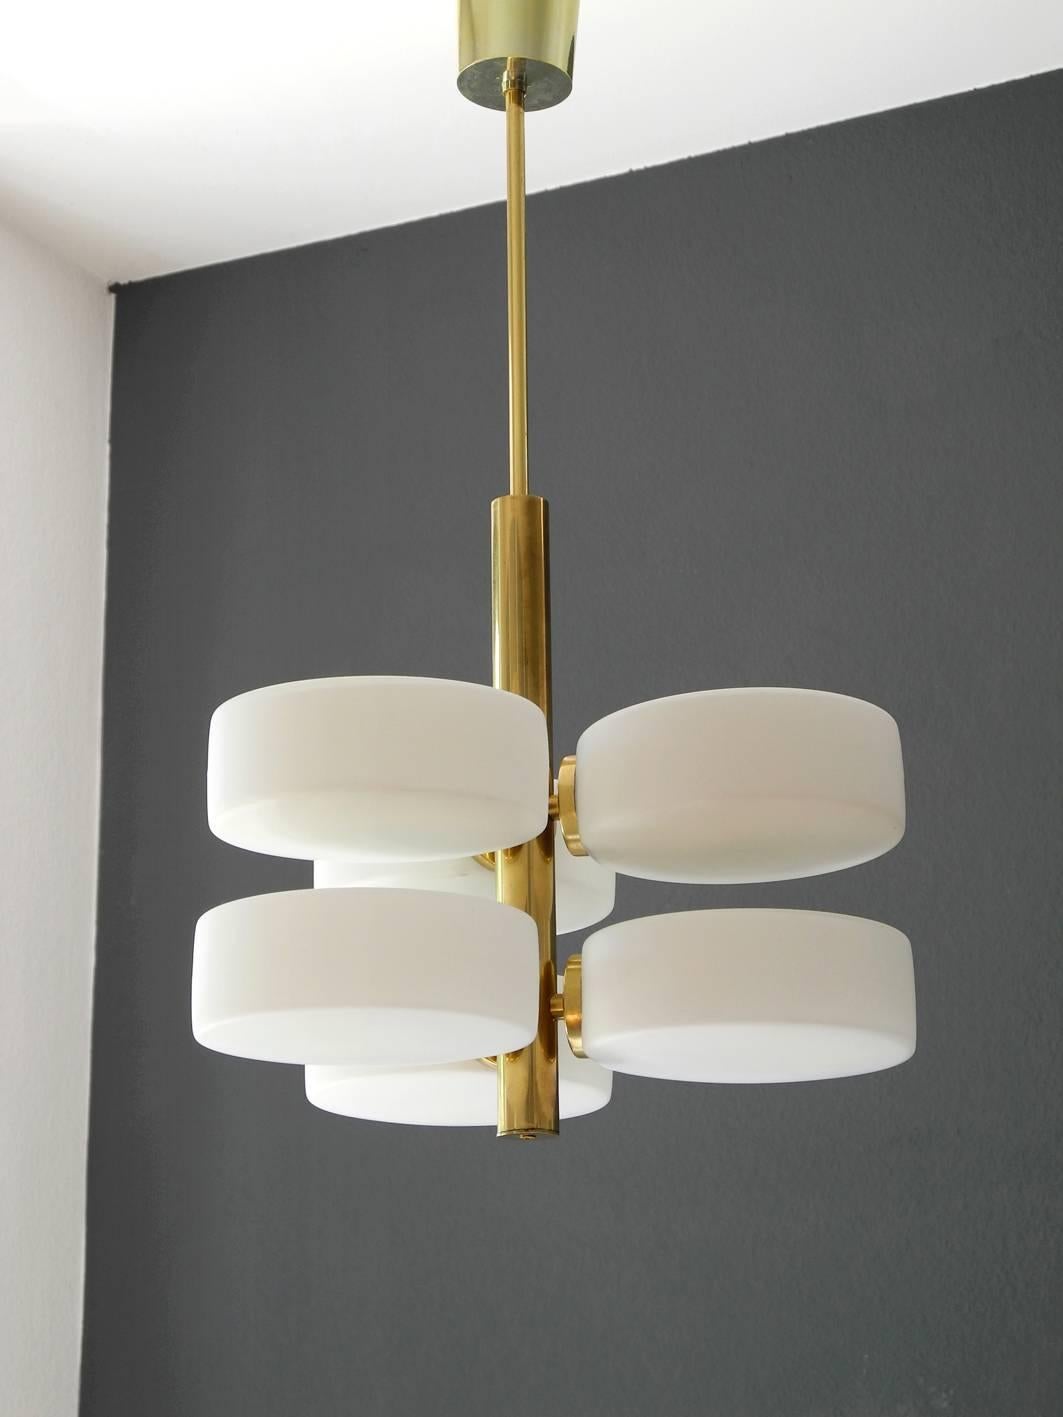 Beautiful rare Kaiser brass ceiling lamp with six flat cylindrical opal glass shades. Great 1960s Space Age design for pleasant and glare-free light. Very good vintage condition without damage. Original condition and fully functional.
Six E14